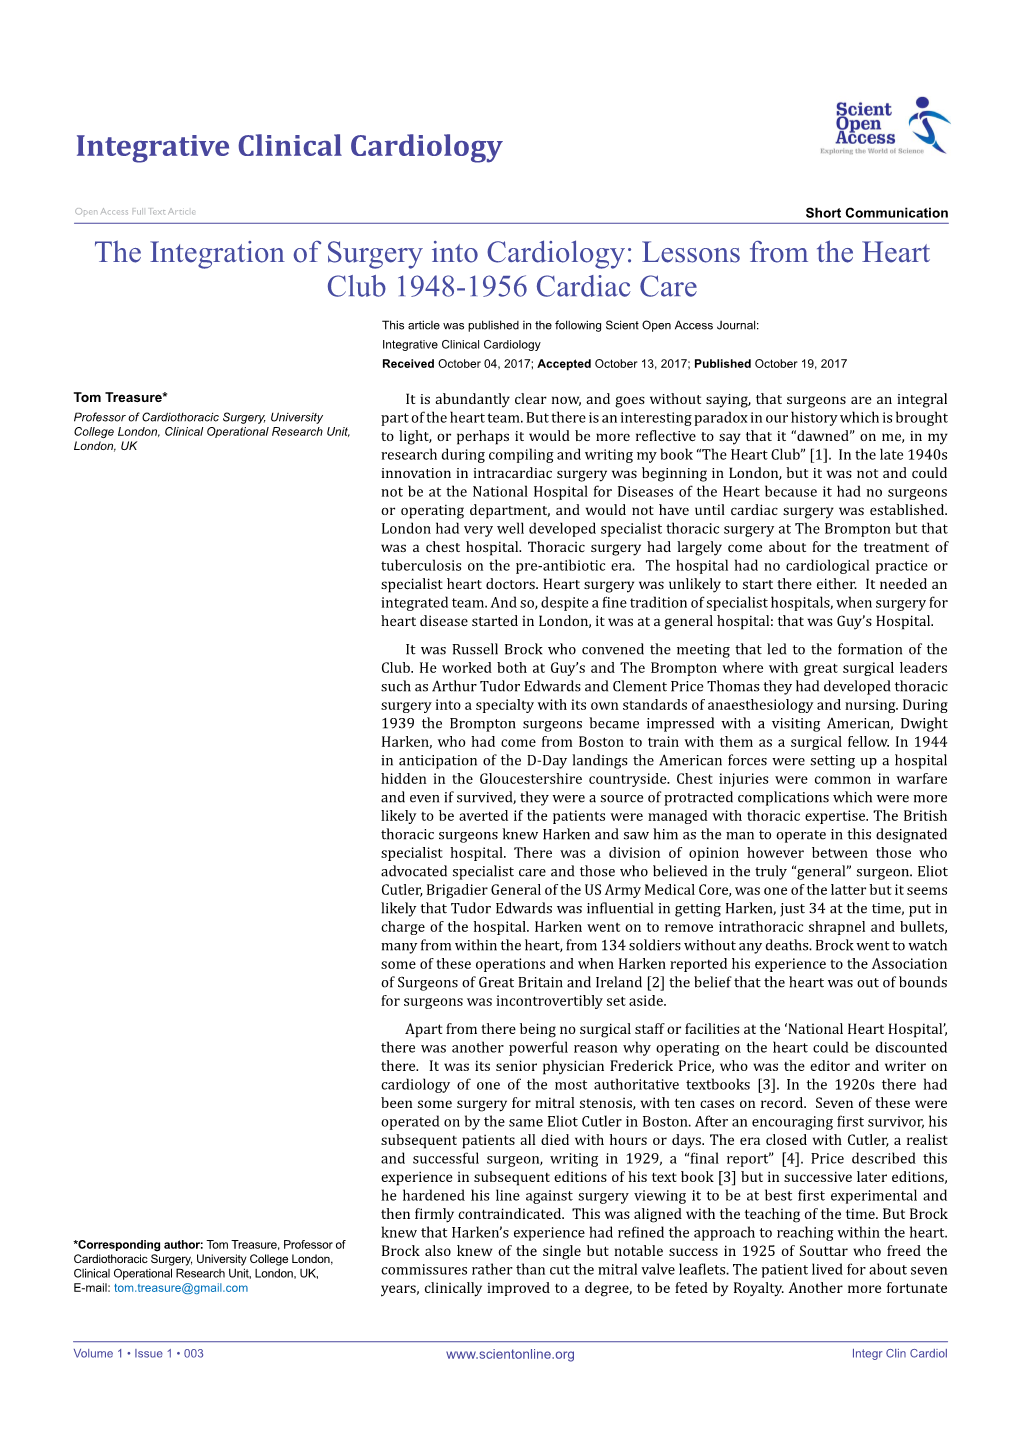 The Integration of Surgery Into Cardiology: Lessons from the Heart Club 1948-1956 Cardiac Care